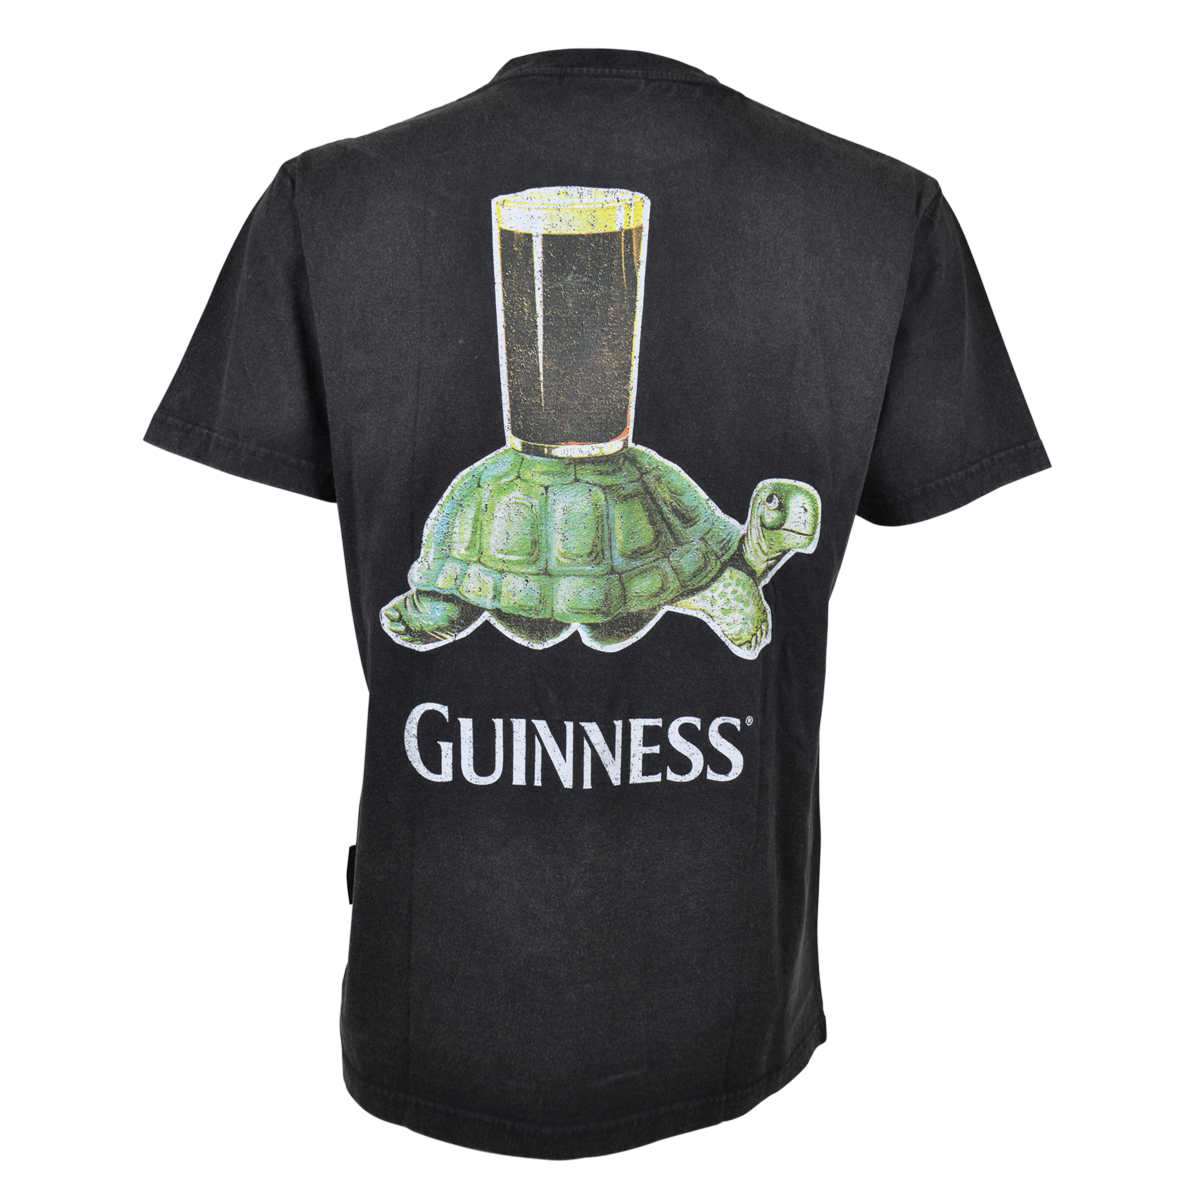 Guinness Vintage Turtle Back Graphic T-Shirt: This distressed t-shirt featuring a Guinness turtle design is a must-have for fans of the iconic beer brand Guinness UK.